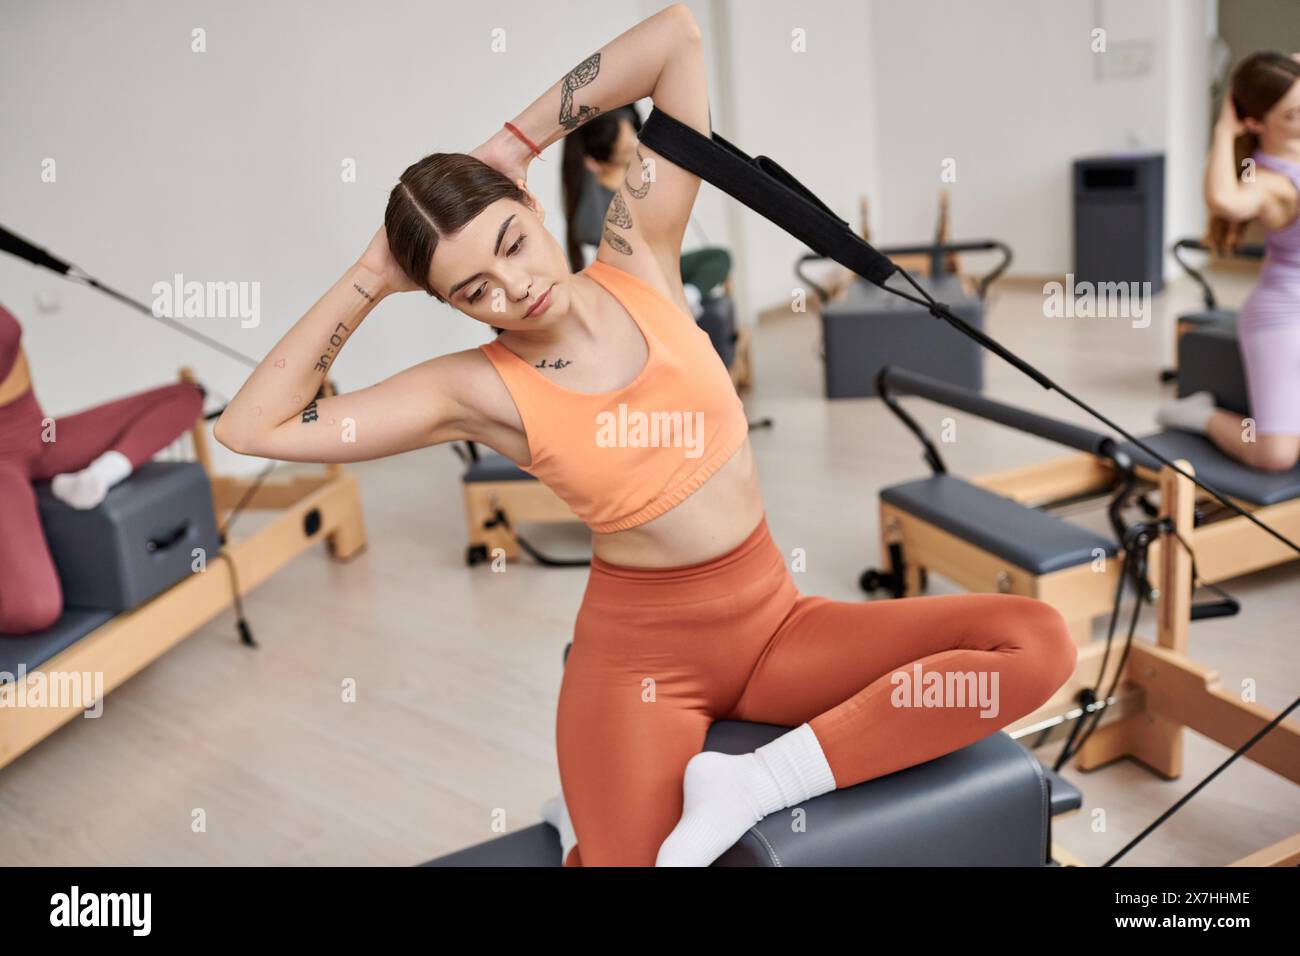 Sporty woman pivots gracefully in pilates class. Stock Photo